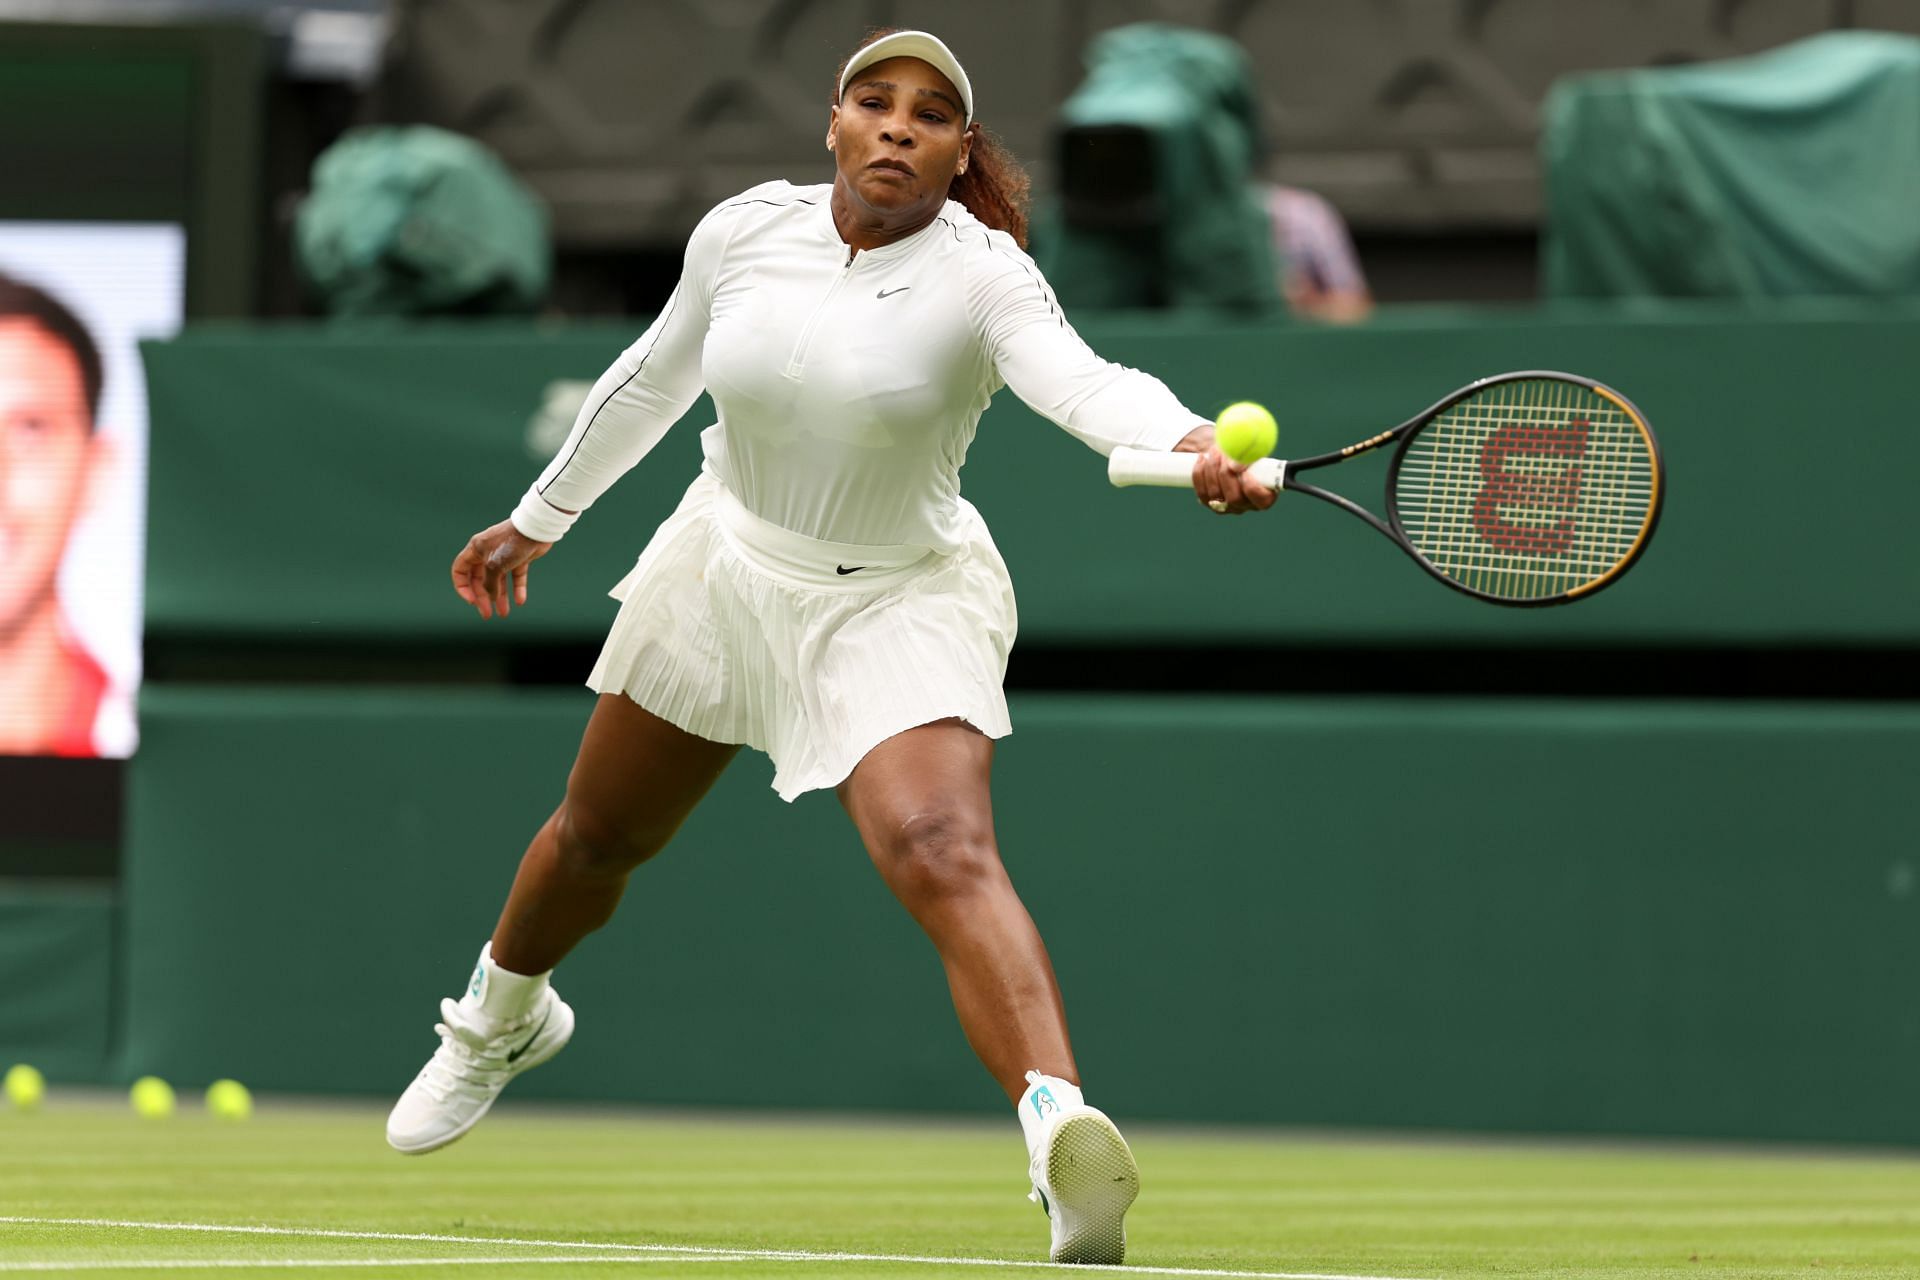 Serena Williams is on the hunt for her 24th Grand Slam title